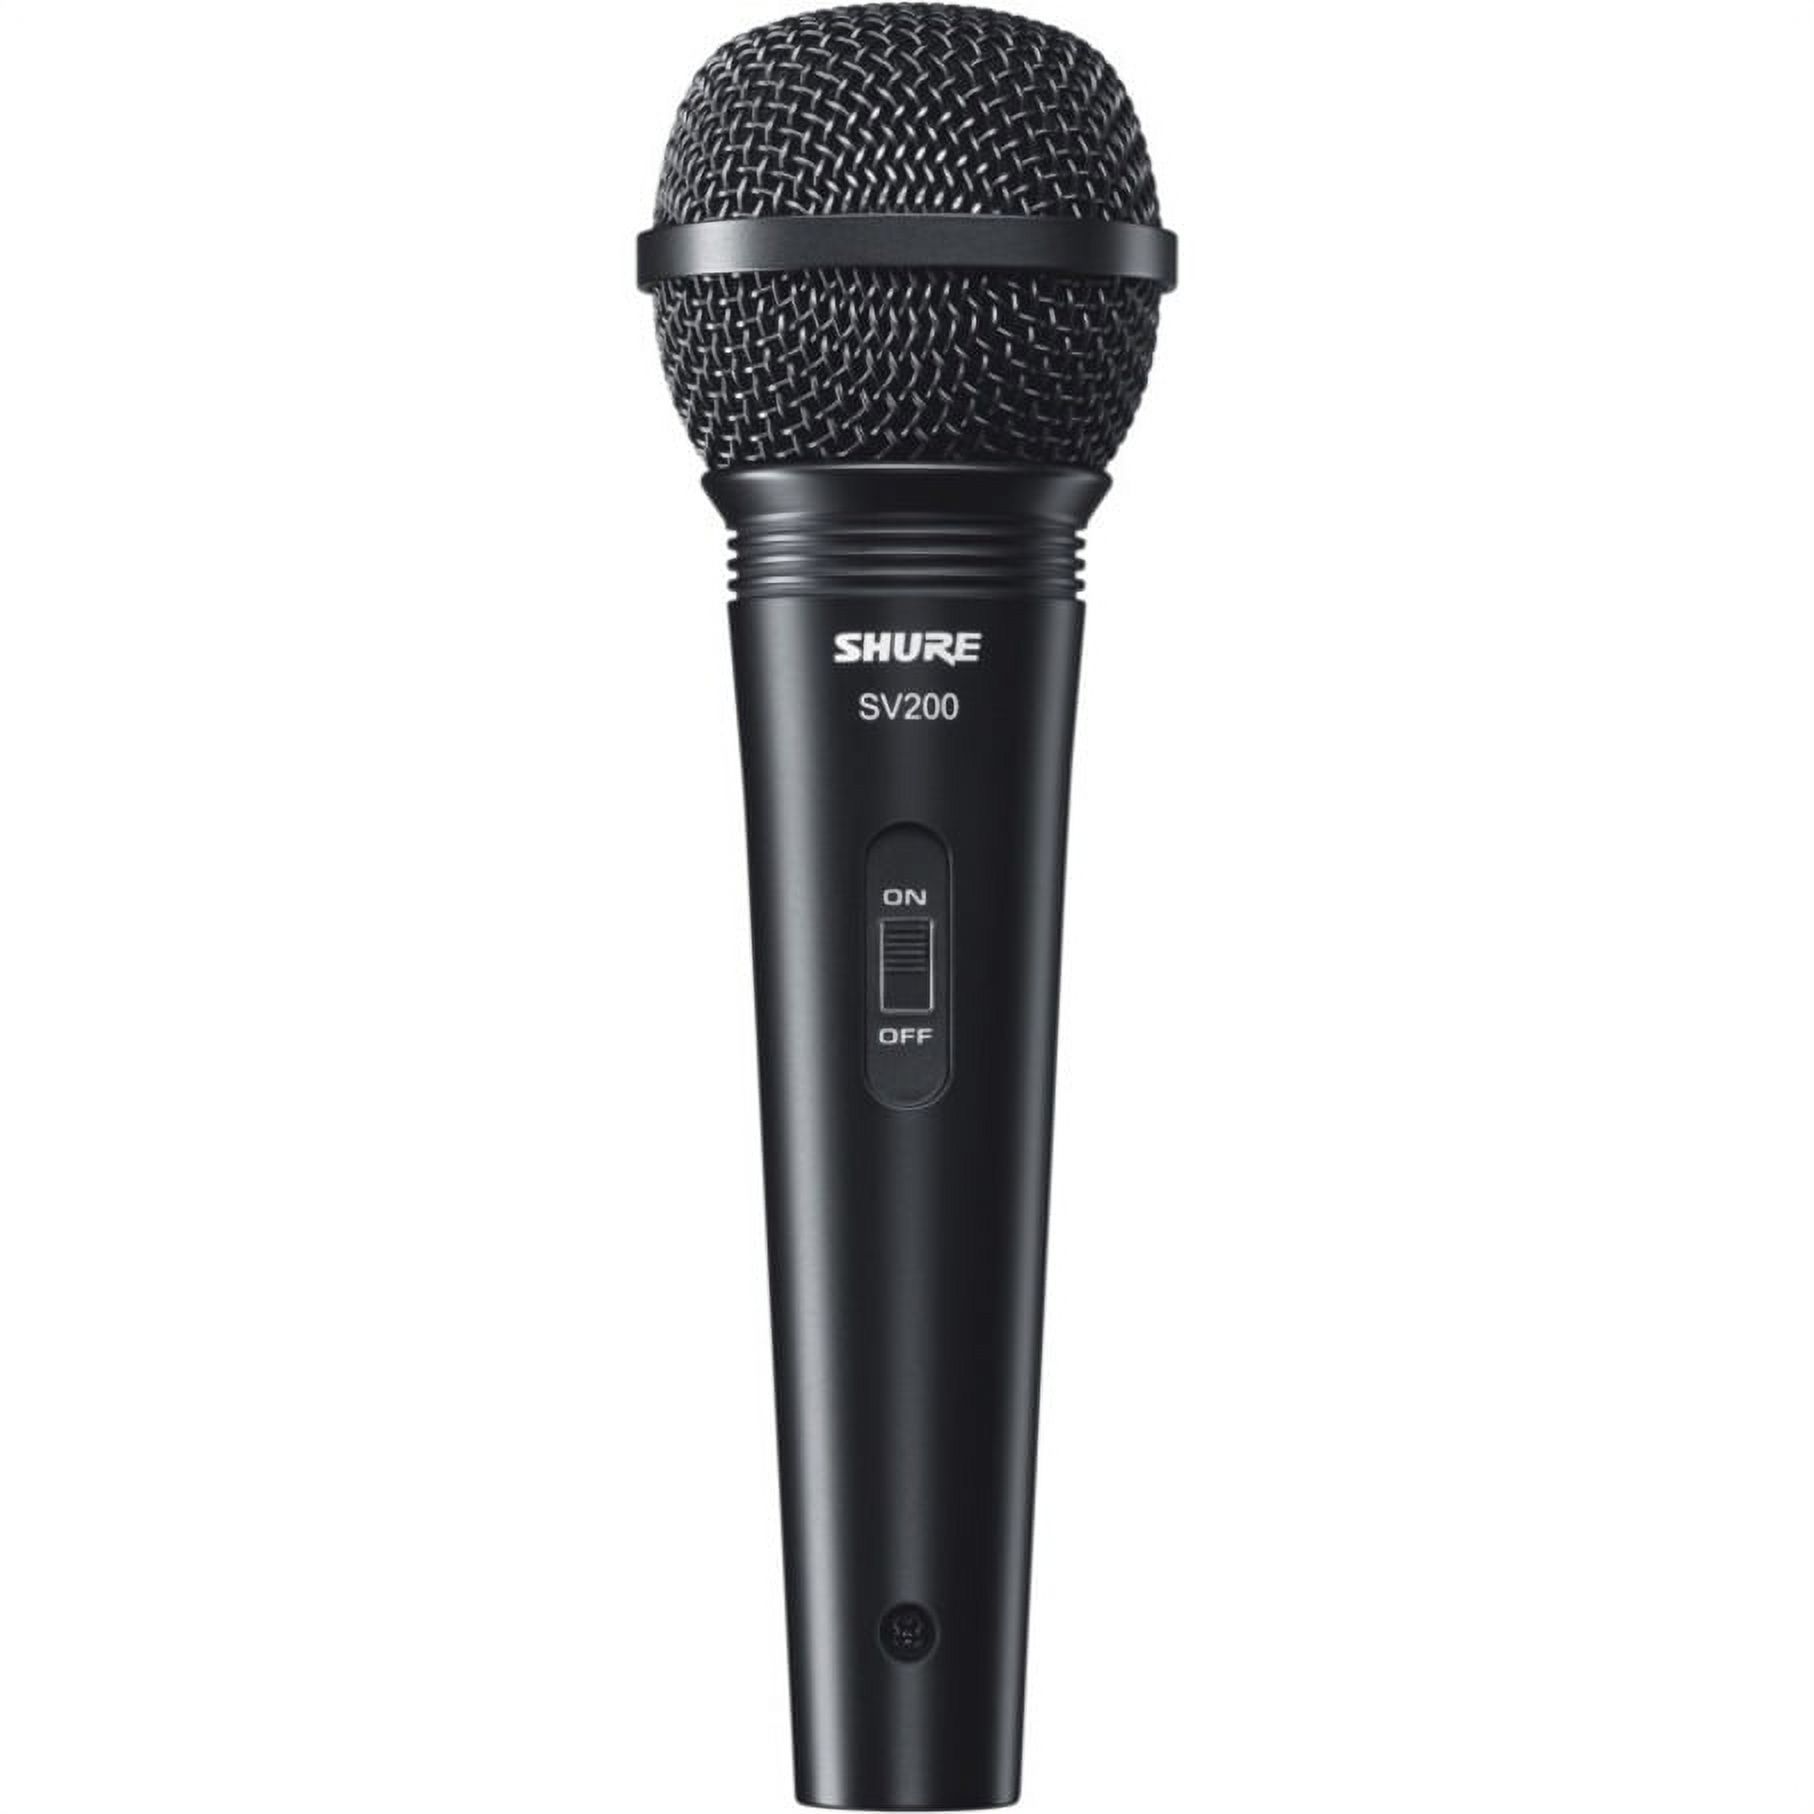 Shure SV200-W Wired Dynamic Microphone - image 1 of 2